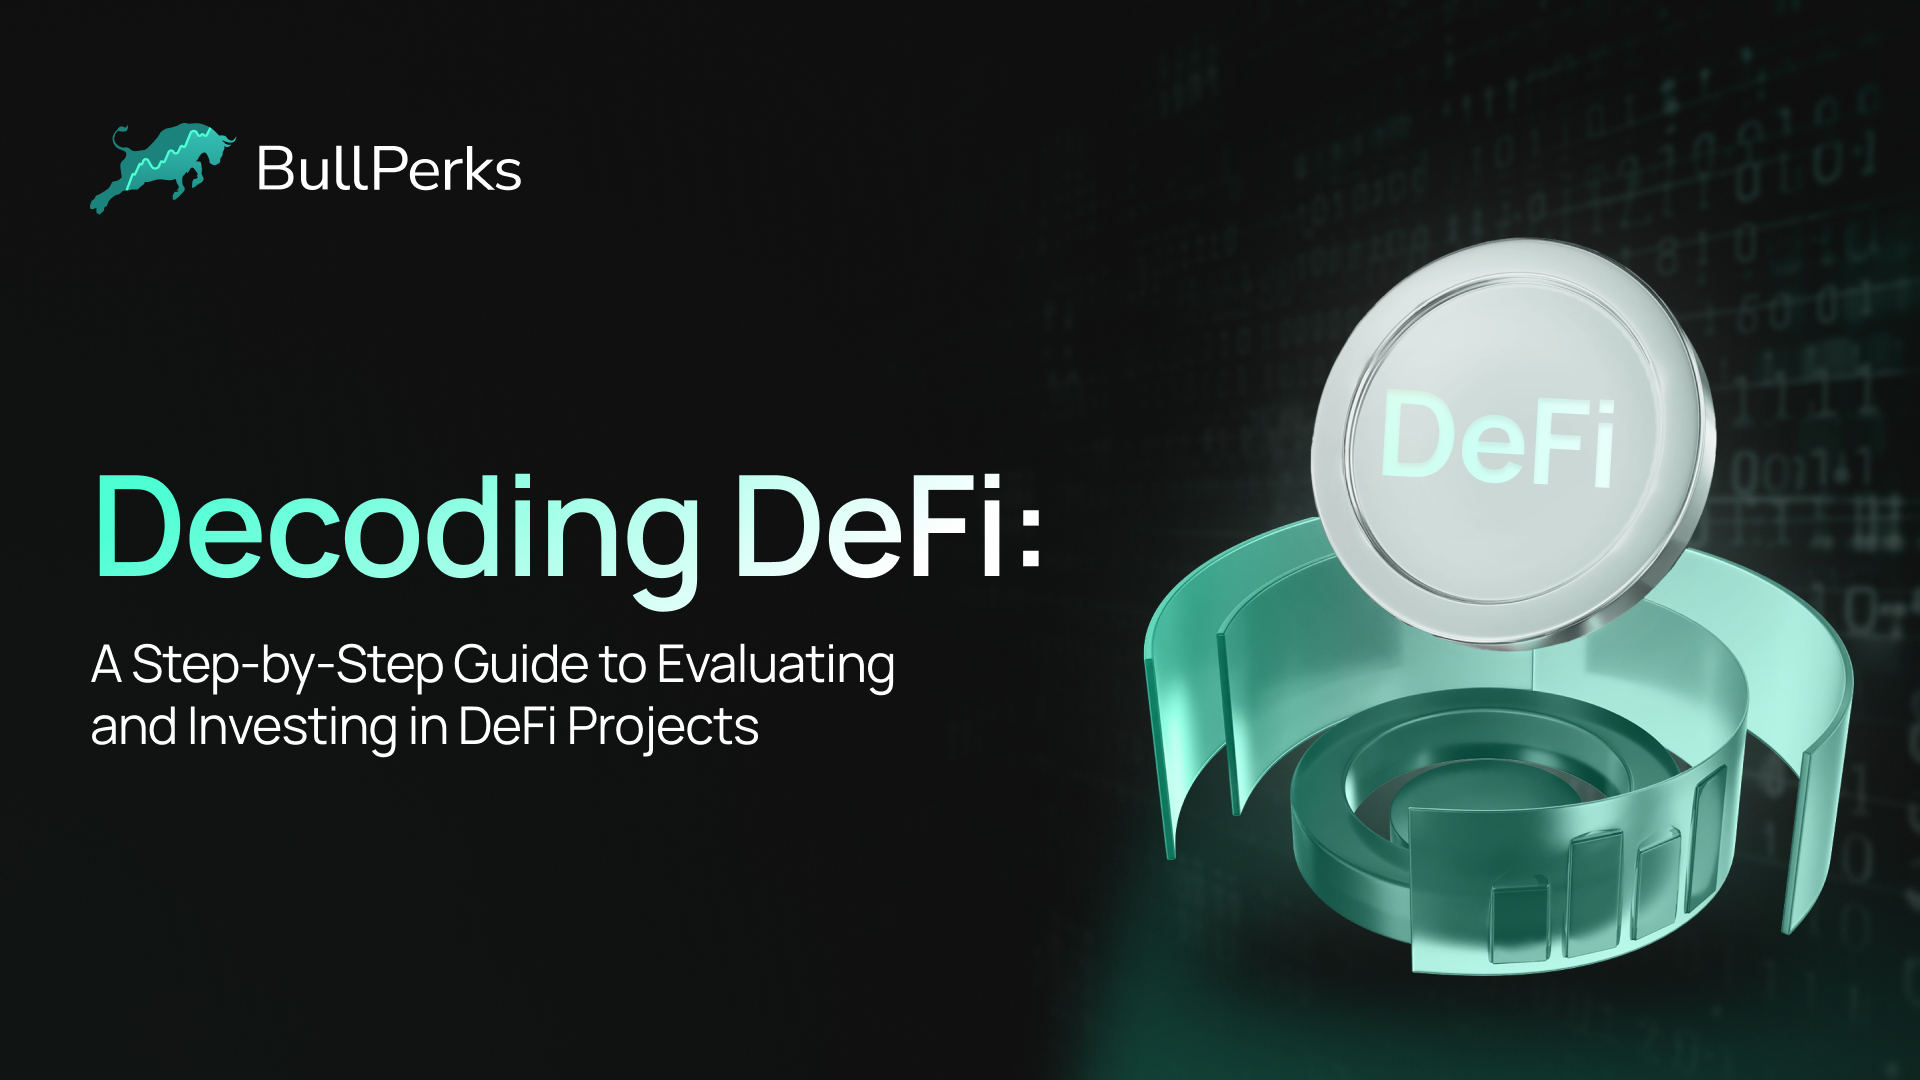 Decoding DeFi: A Step-by-Step Guide to Evaluating and Investing in DeFi Projects 4